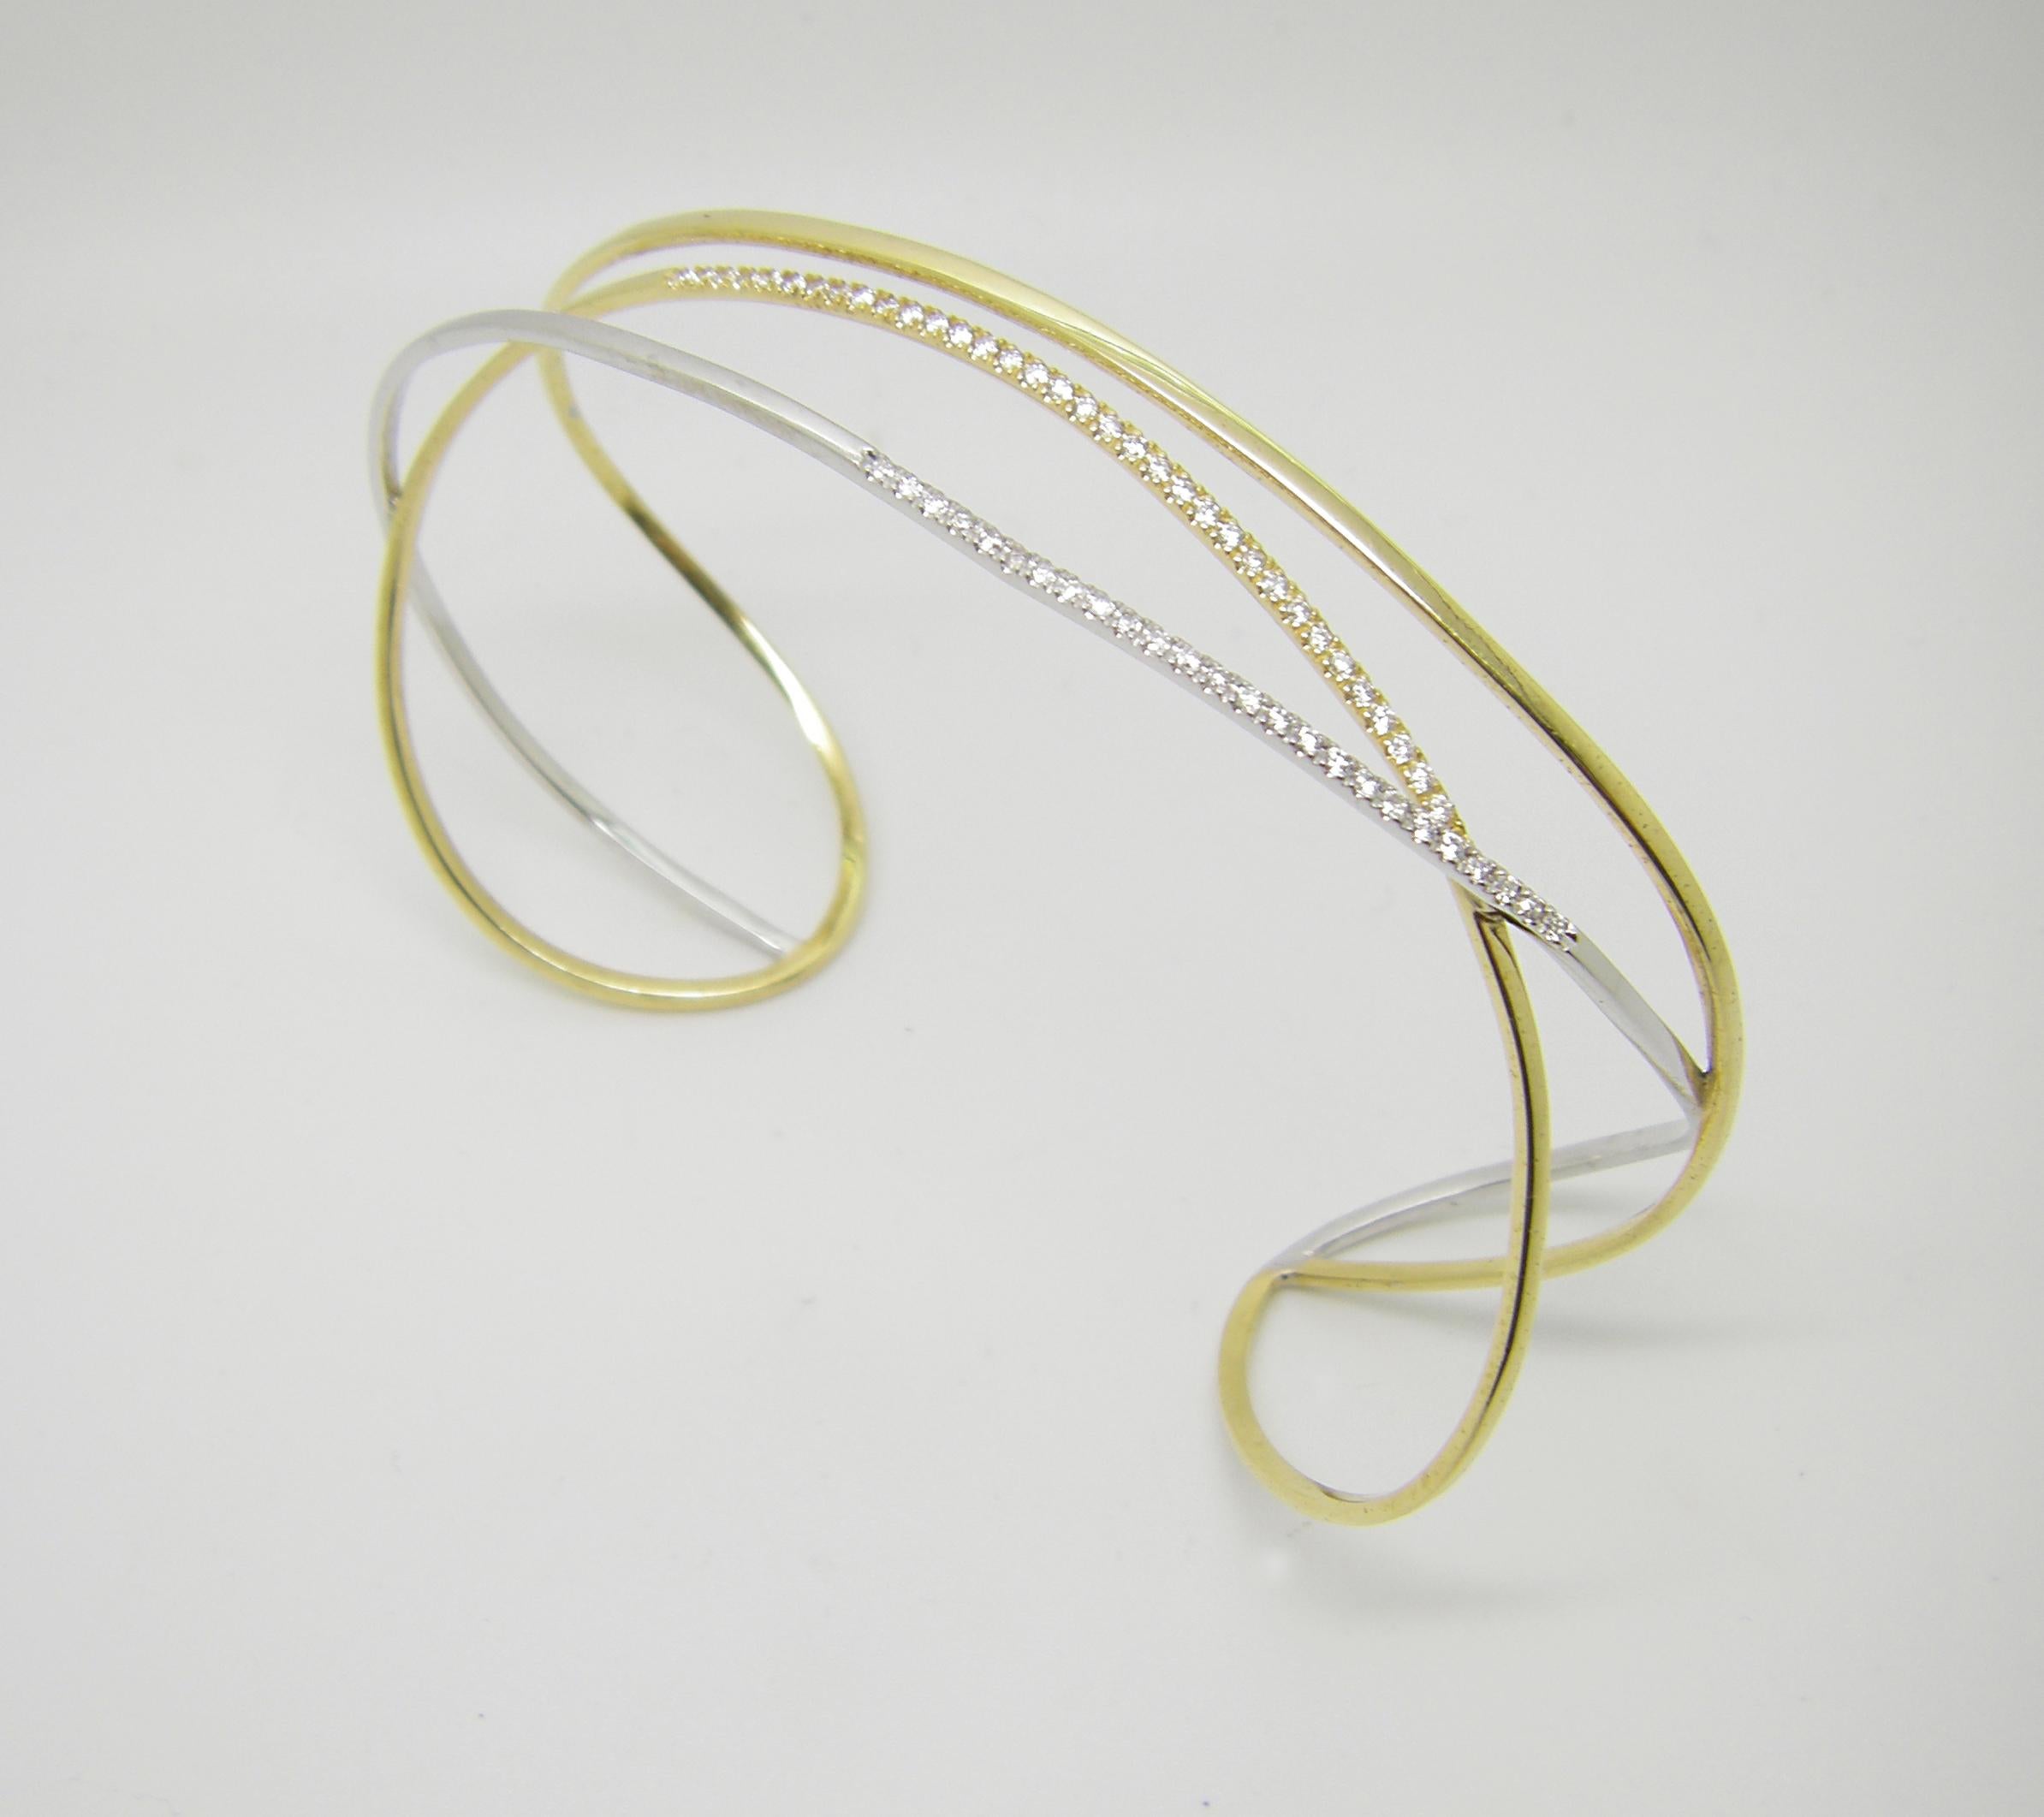 This S.Georgios designer bangle cuff bracelet is custom made of white and yellow gold 18 karats. The gorgeous cuff has brilliant cut white diamonds total weight of 0.46 Carat set microscopically.
We also make this stunning piece in all white, all